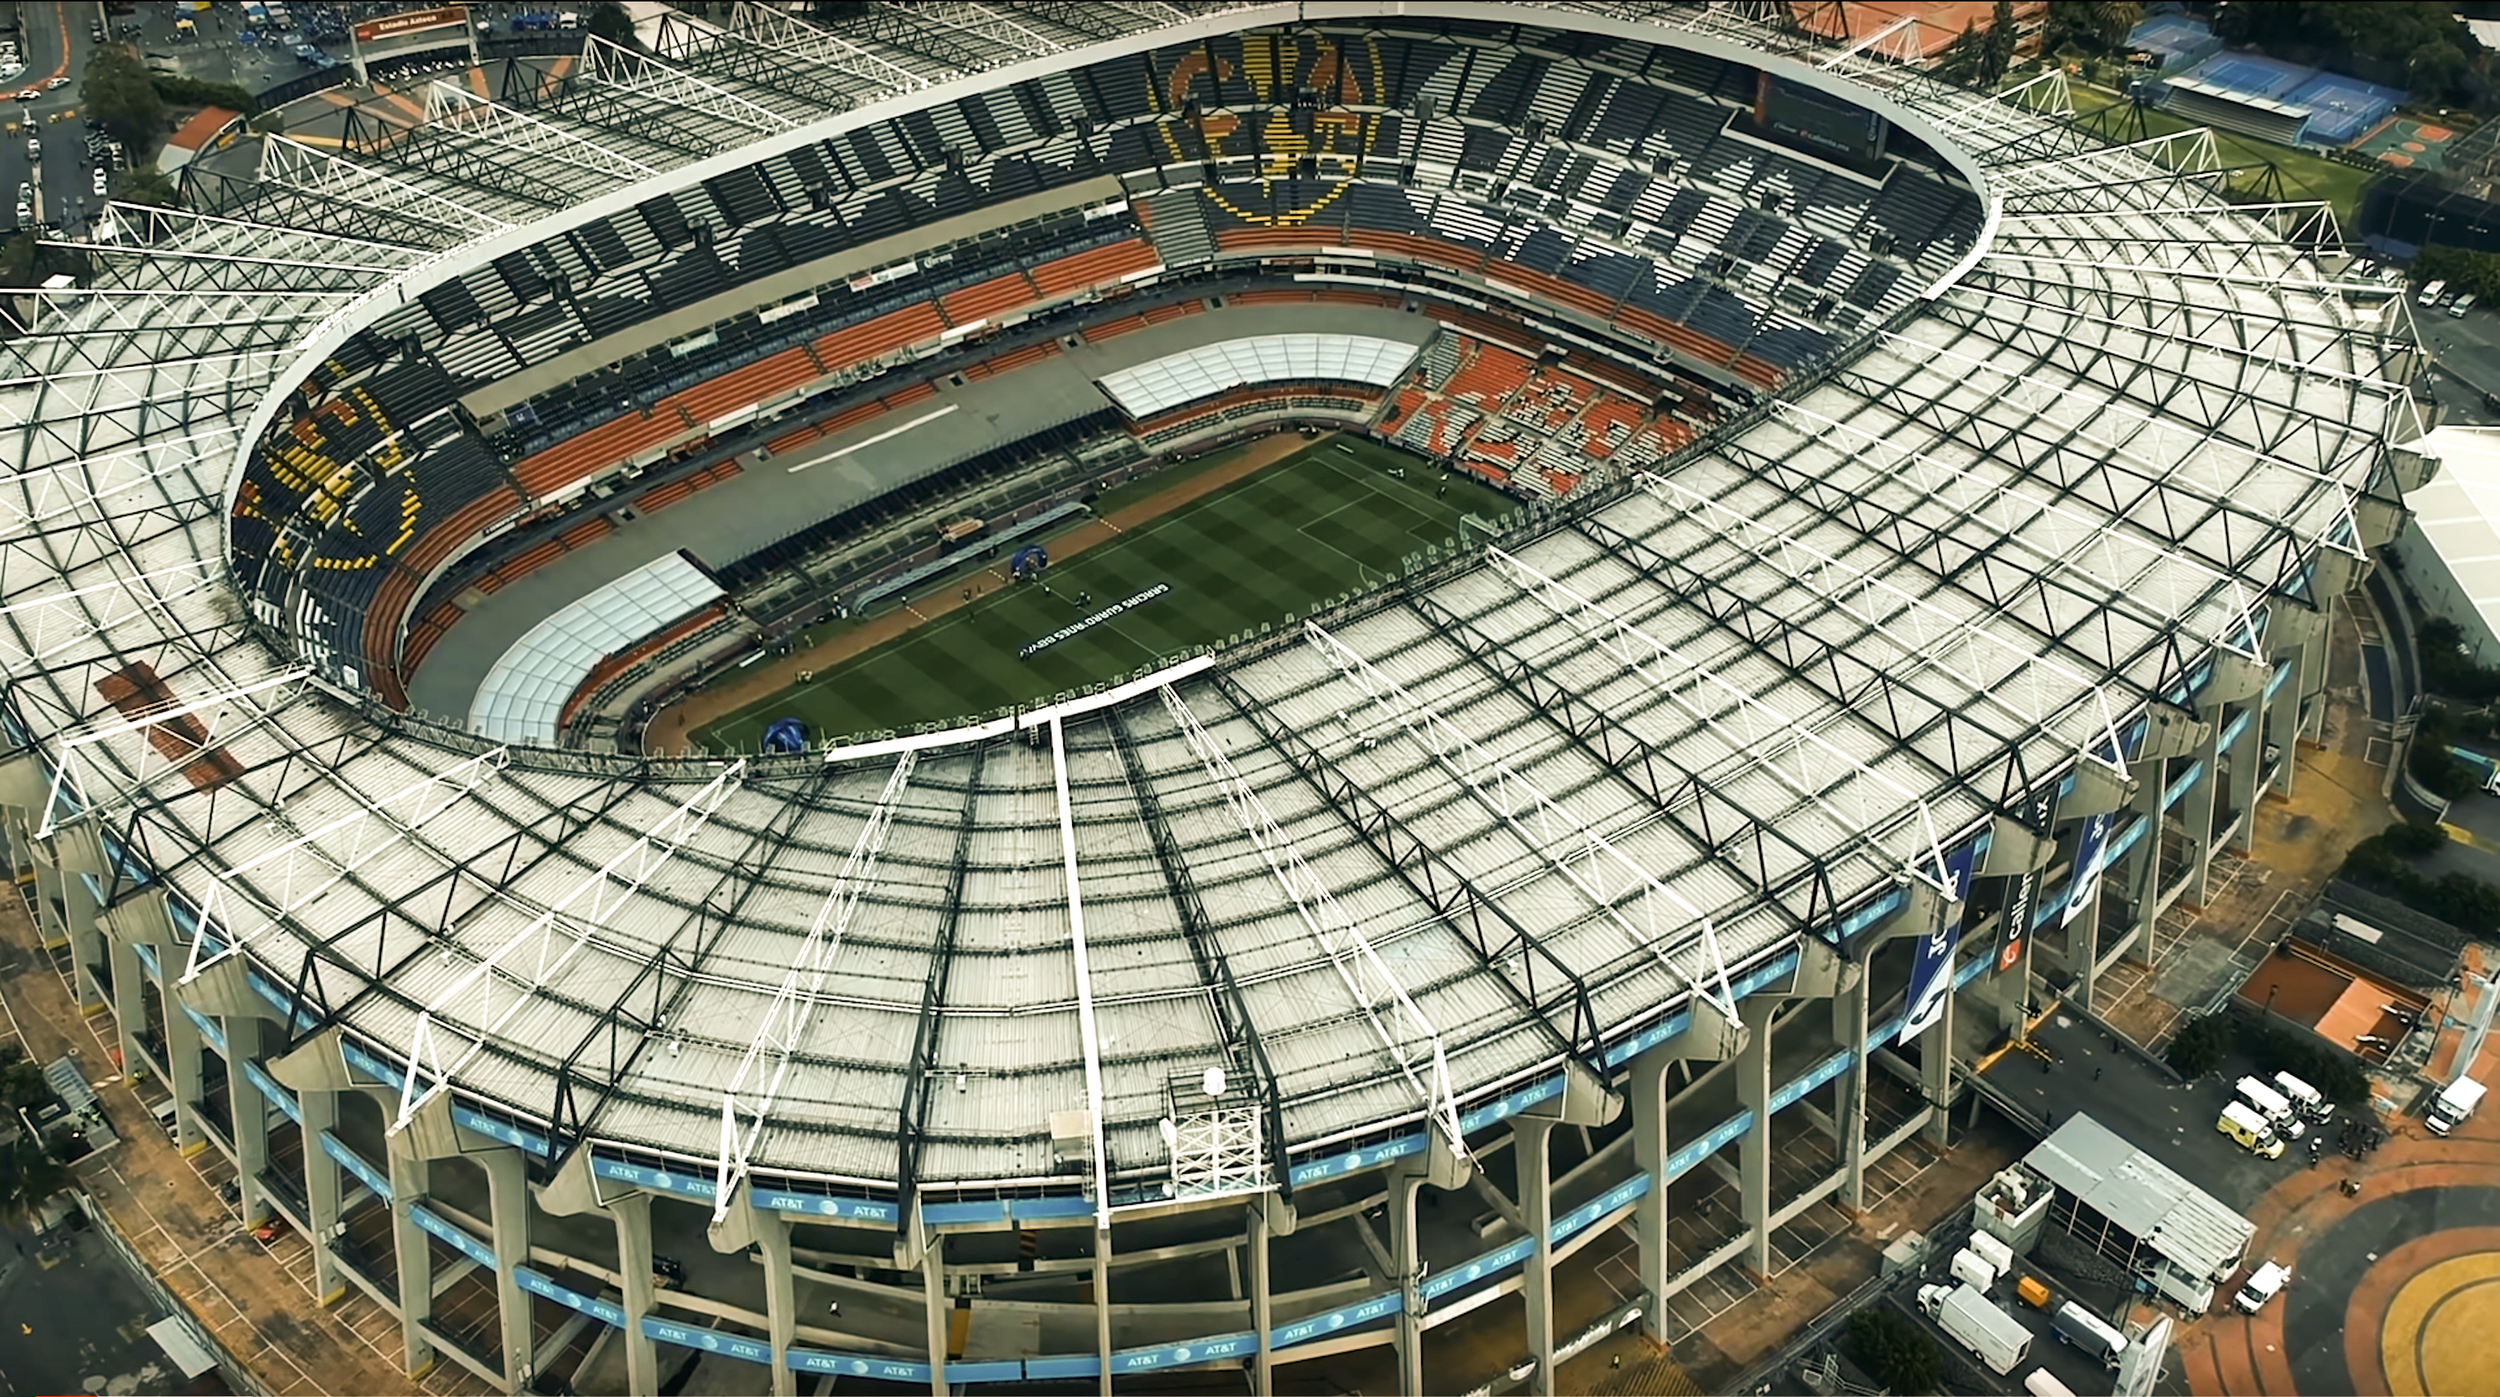 Guide to Estadio Azteca — Go For The Game